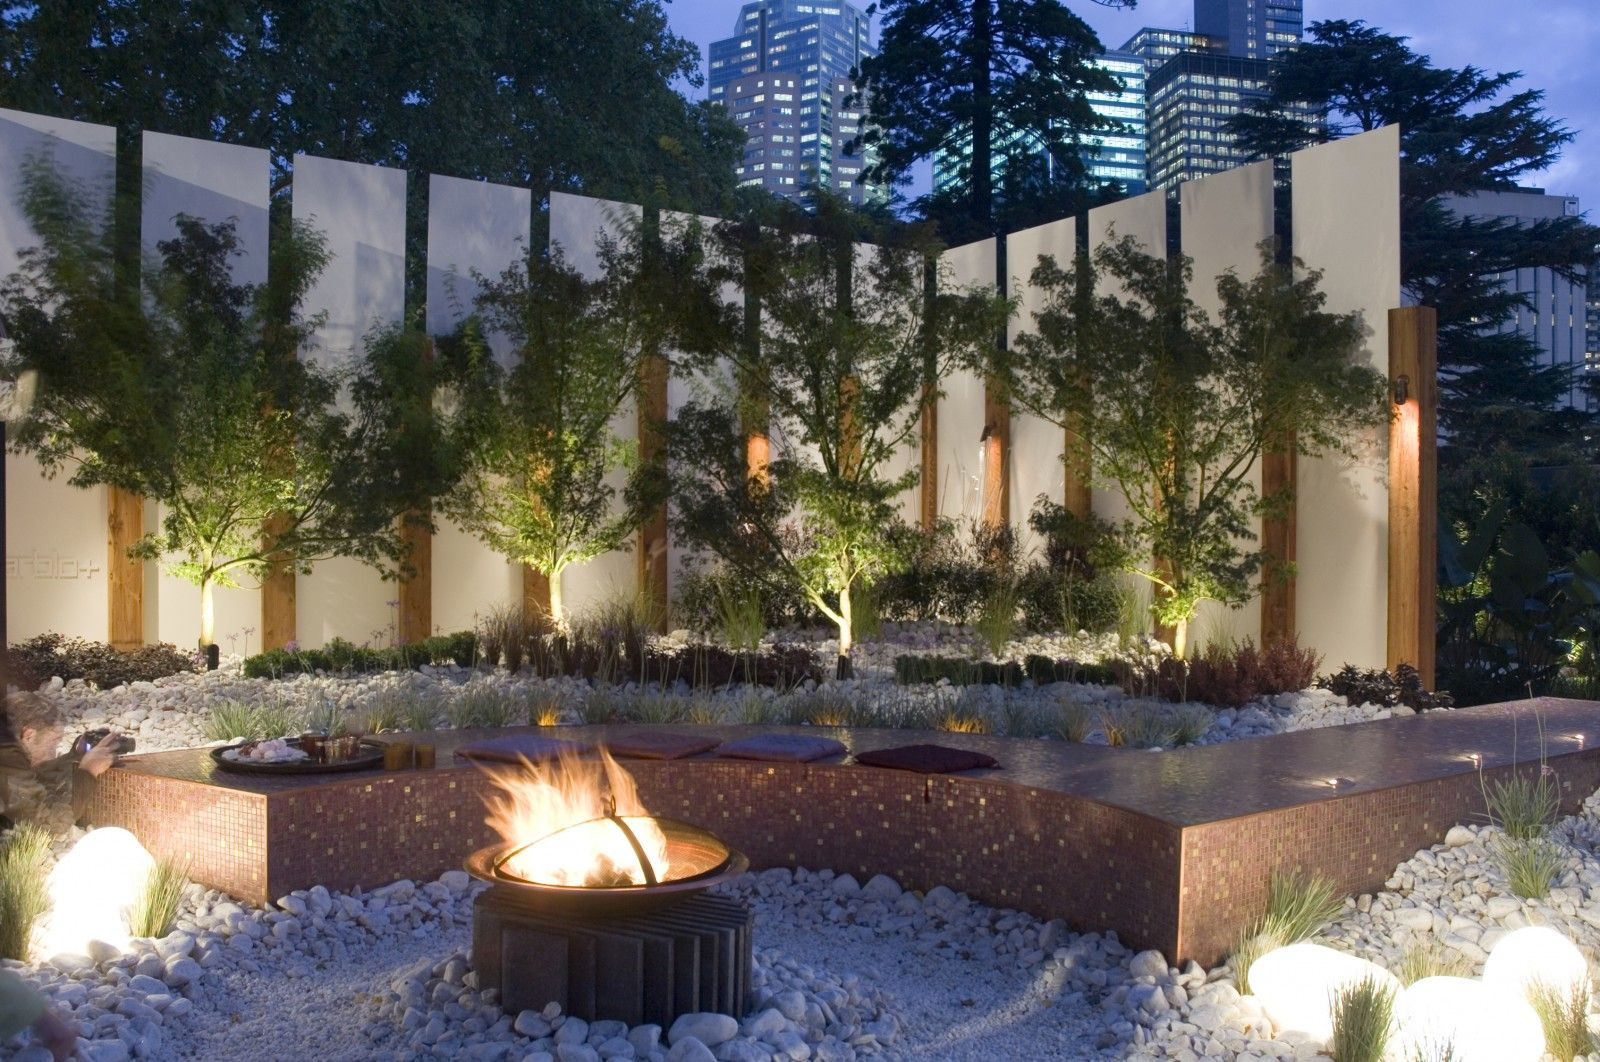 Built In Bench And Firepit Jamie Durie Landscape Design within size 1600 X 1062